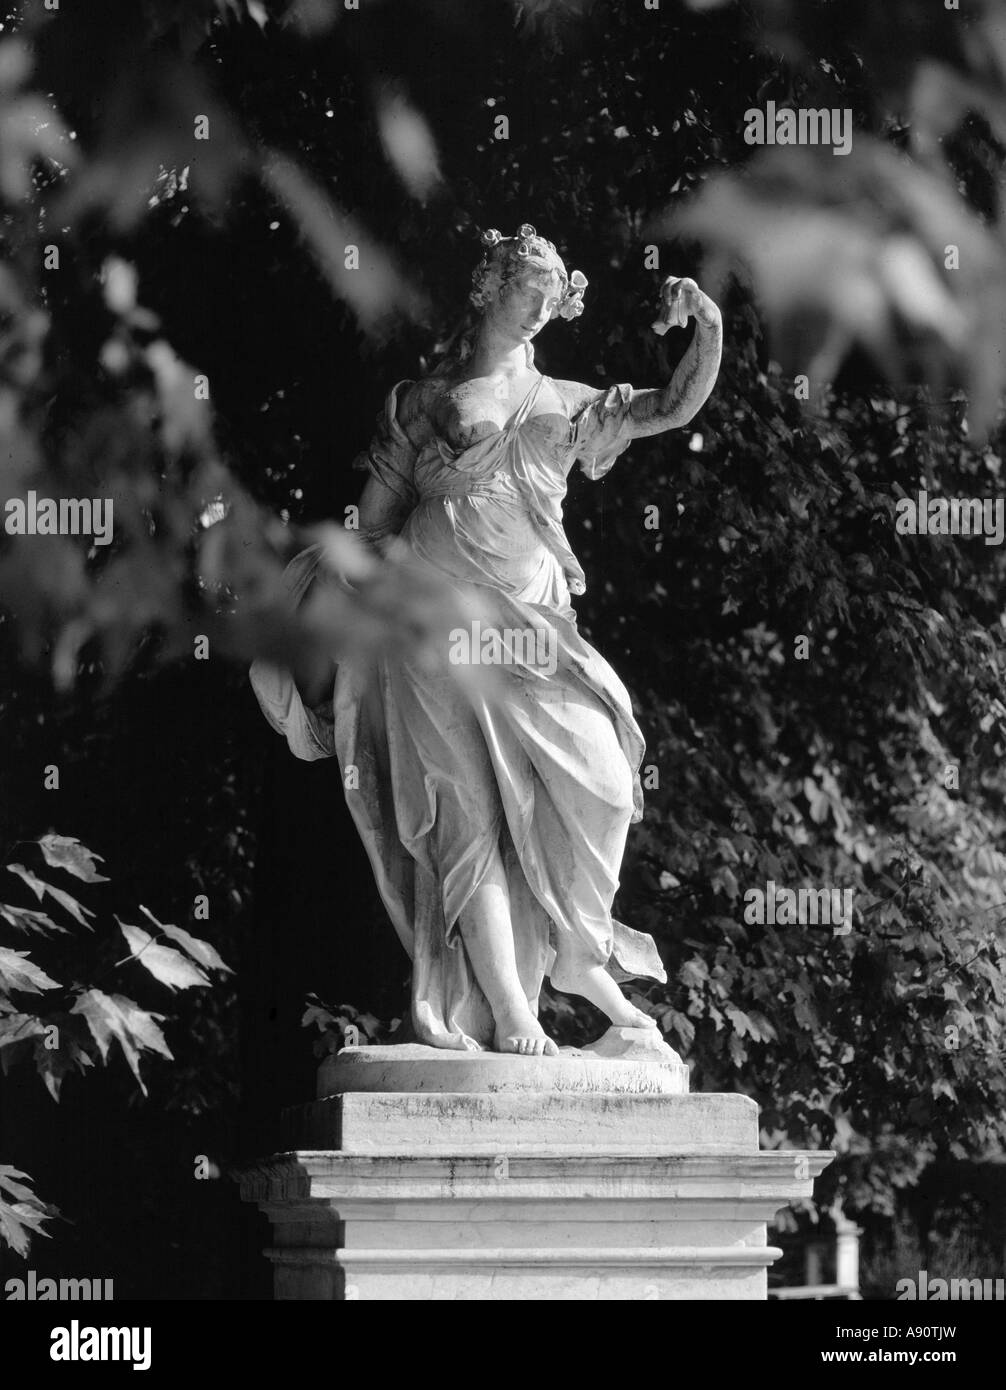 Statue of Flora, goddess of Spring at the Palazzo Reale, Turin, Italy. The gardens were laid out by the French garden designer Andre Le Nôtre in 1697 Stock Photo